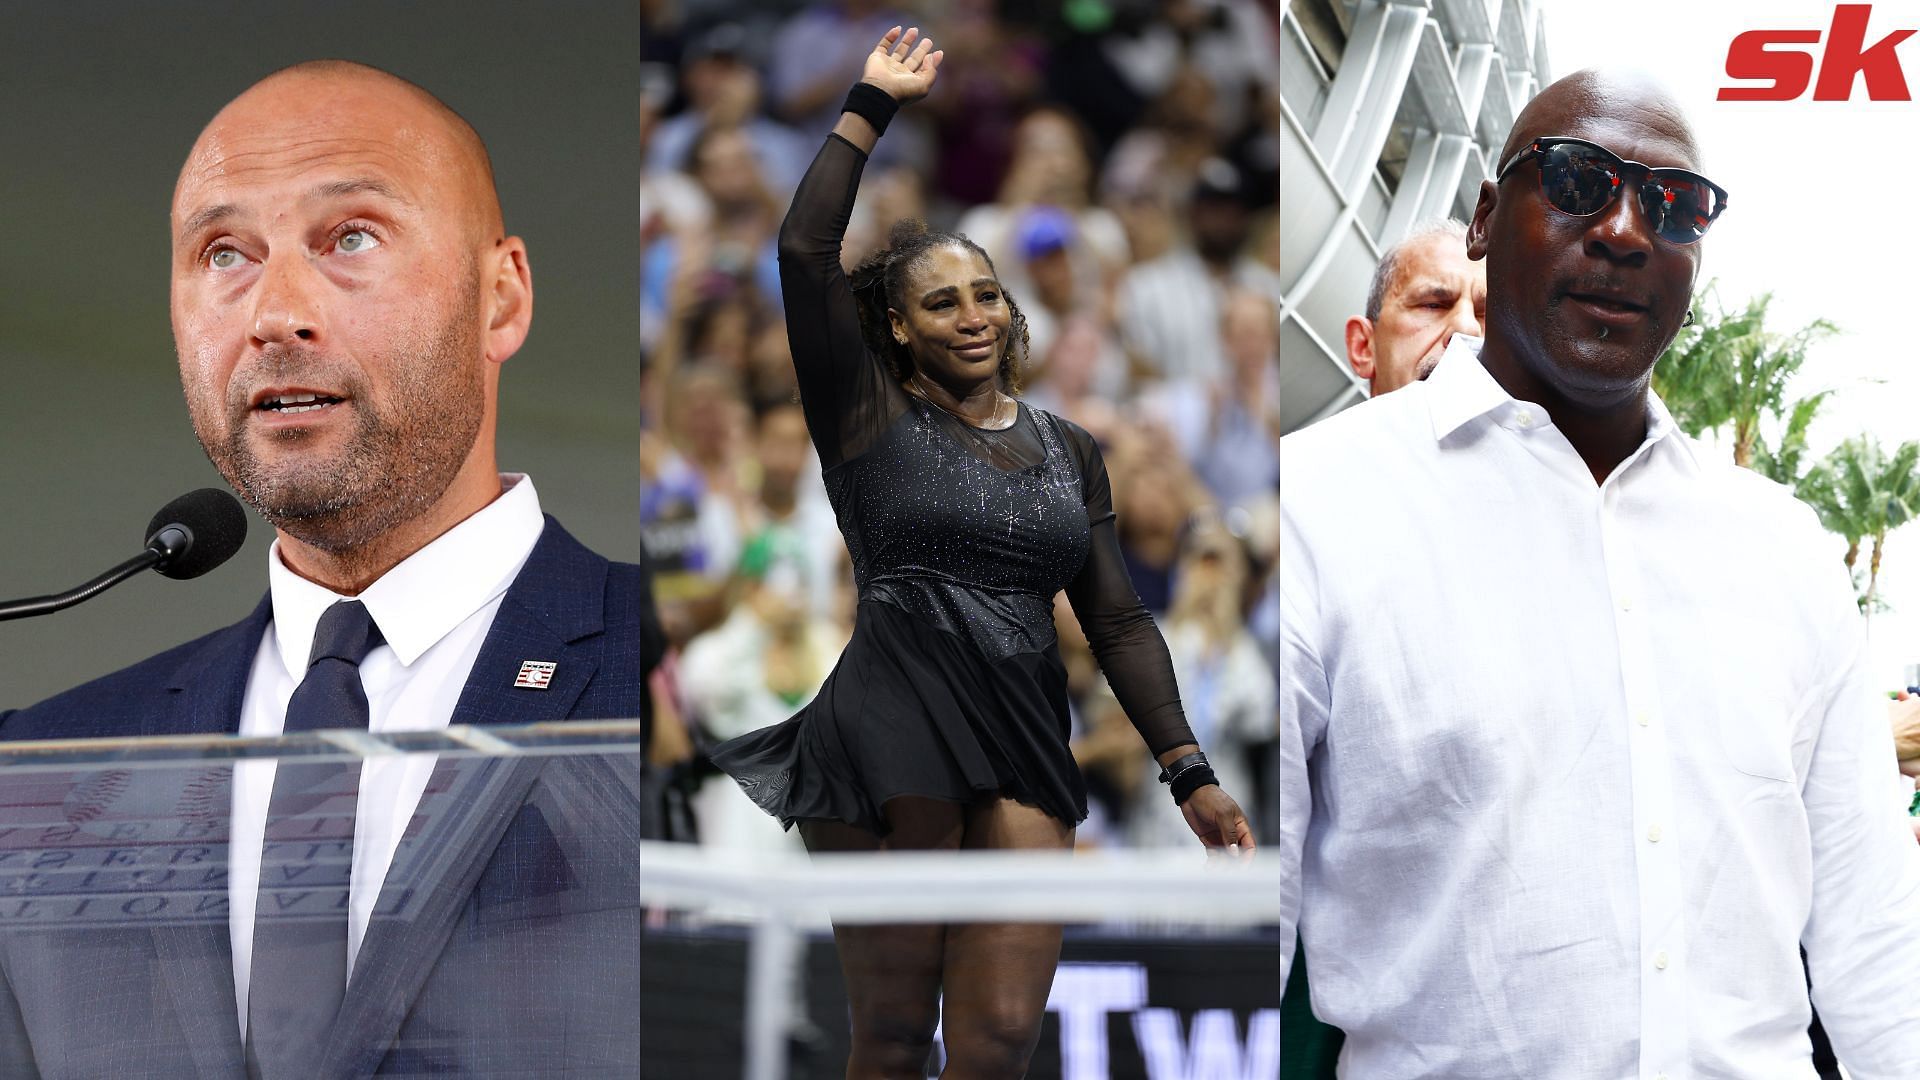 Derek Jeter once predicted his retirement date in a special interview with Michael Jordan and Serena Williams in 2004